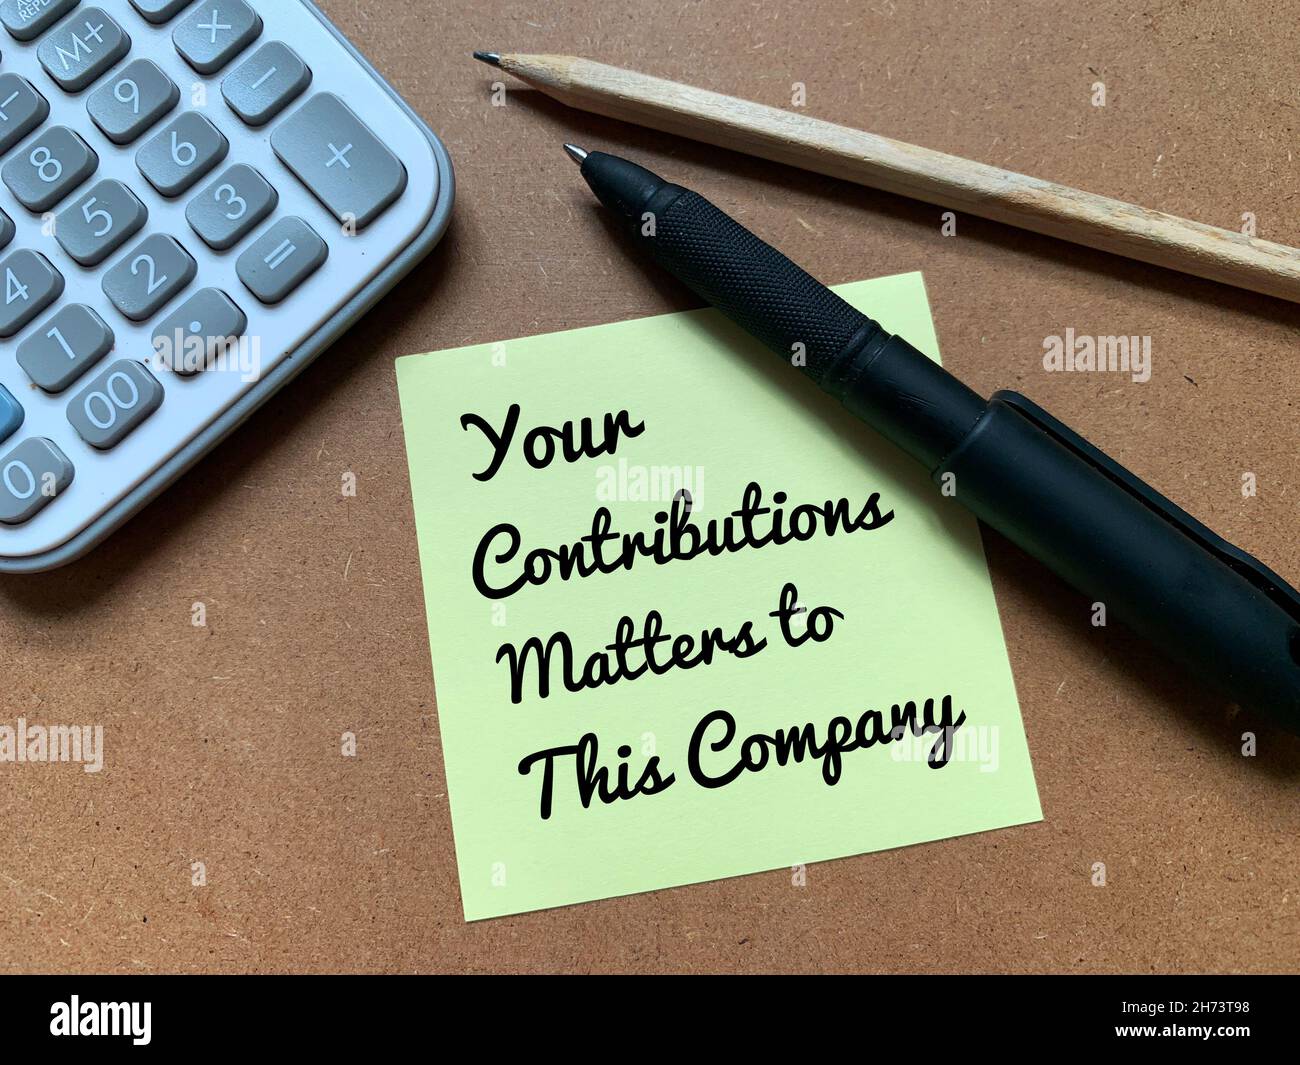 Text on sticky note with calculator, pen and pencil - Your Contributions Matters to This Company Stock Photo